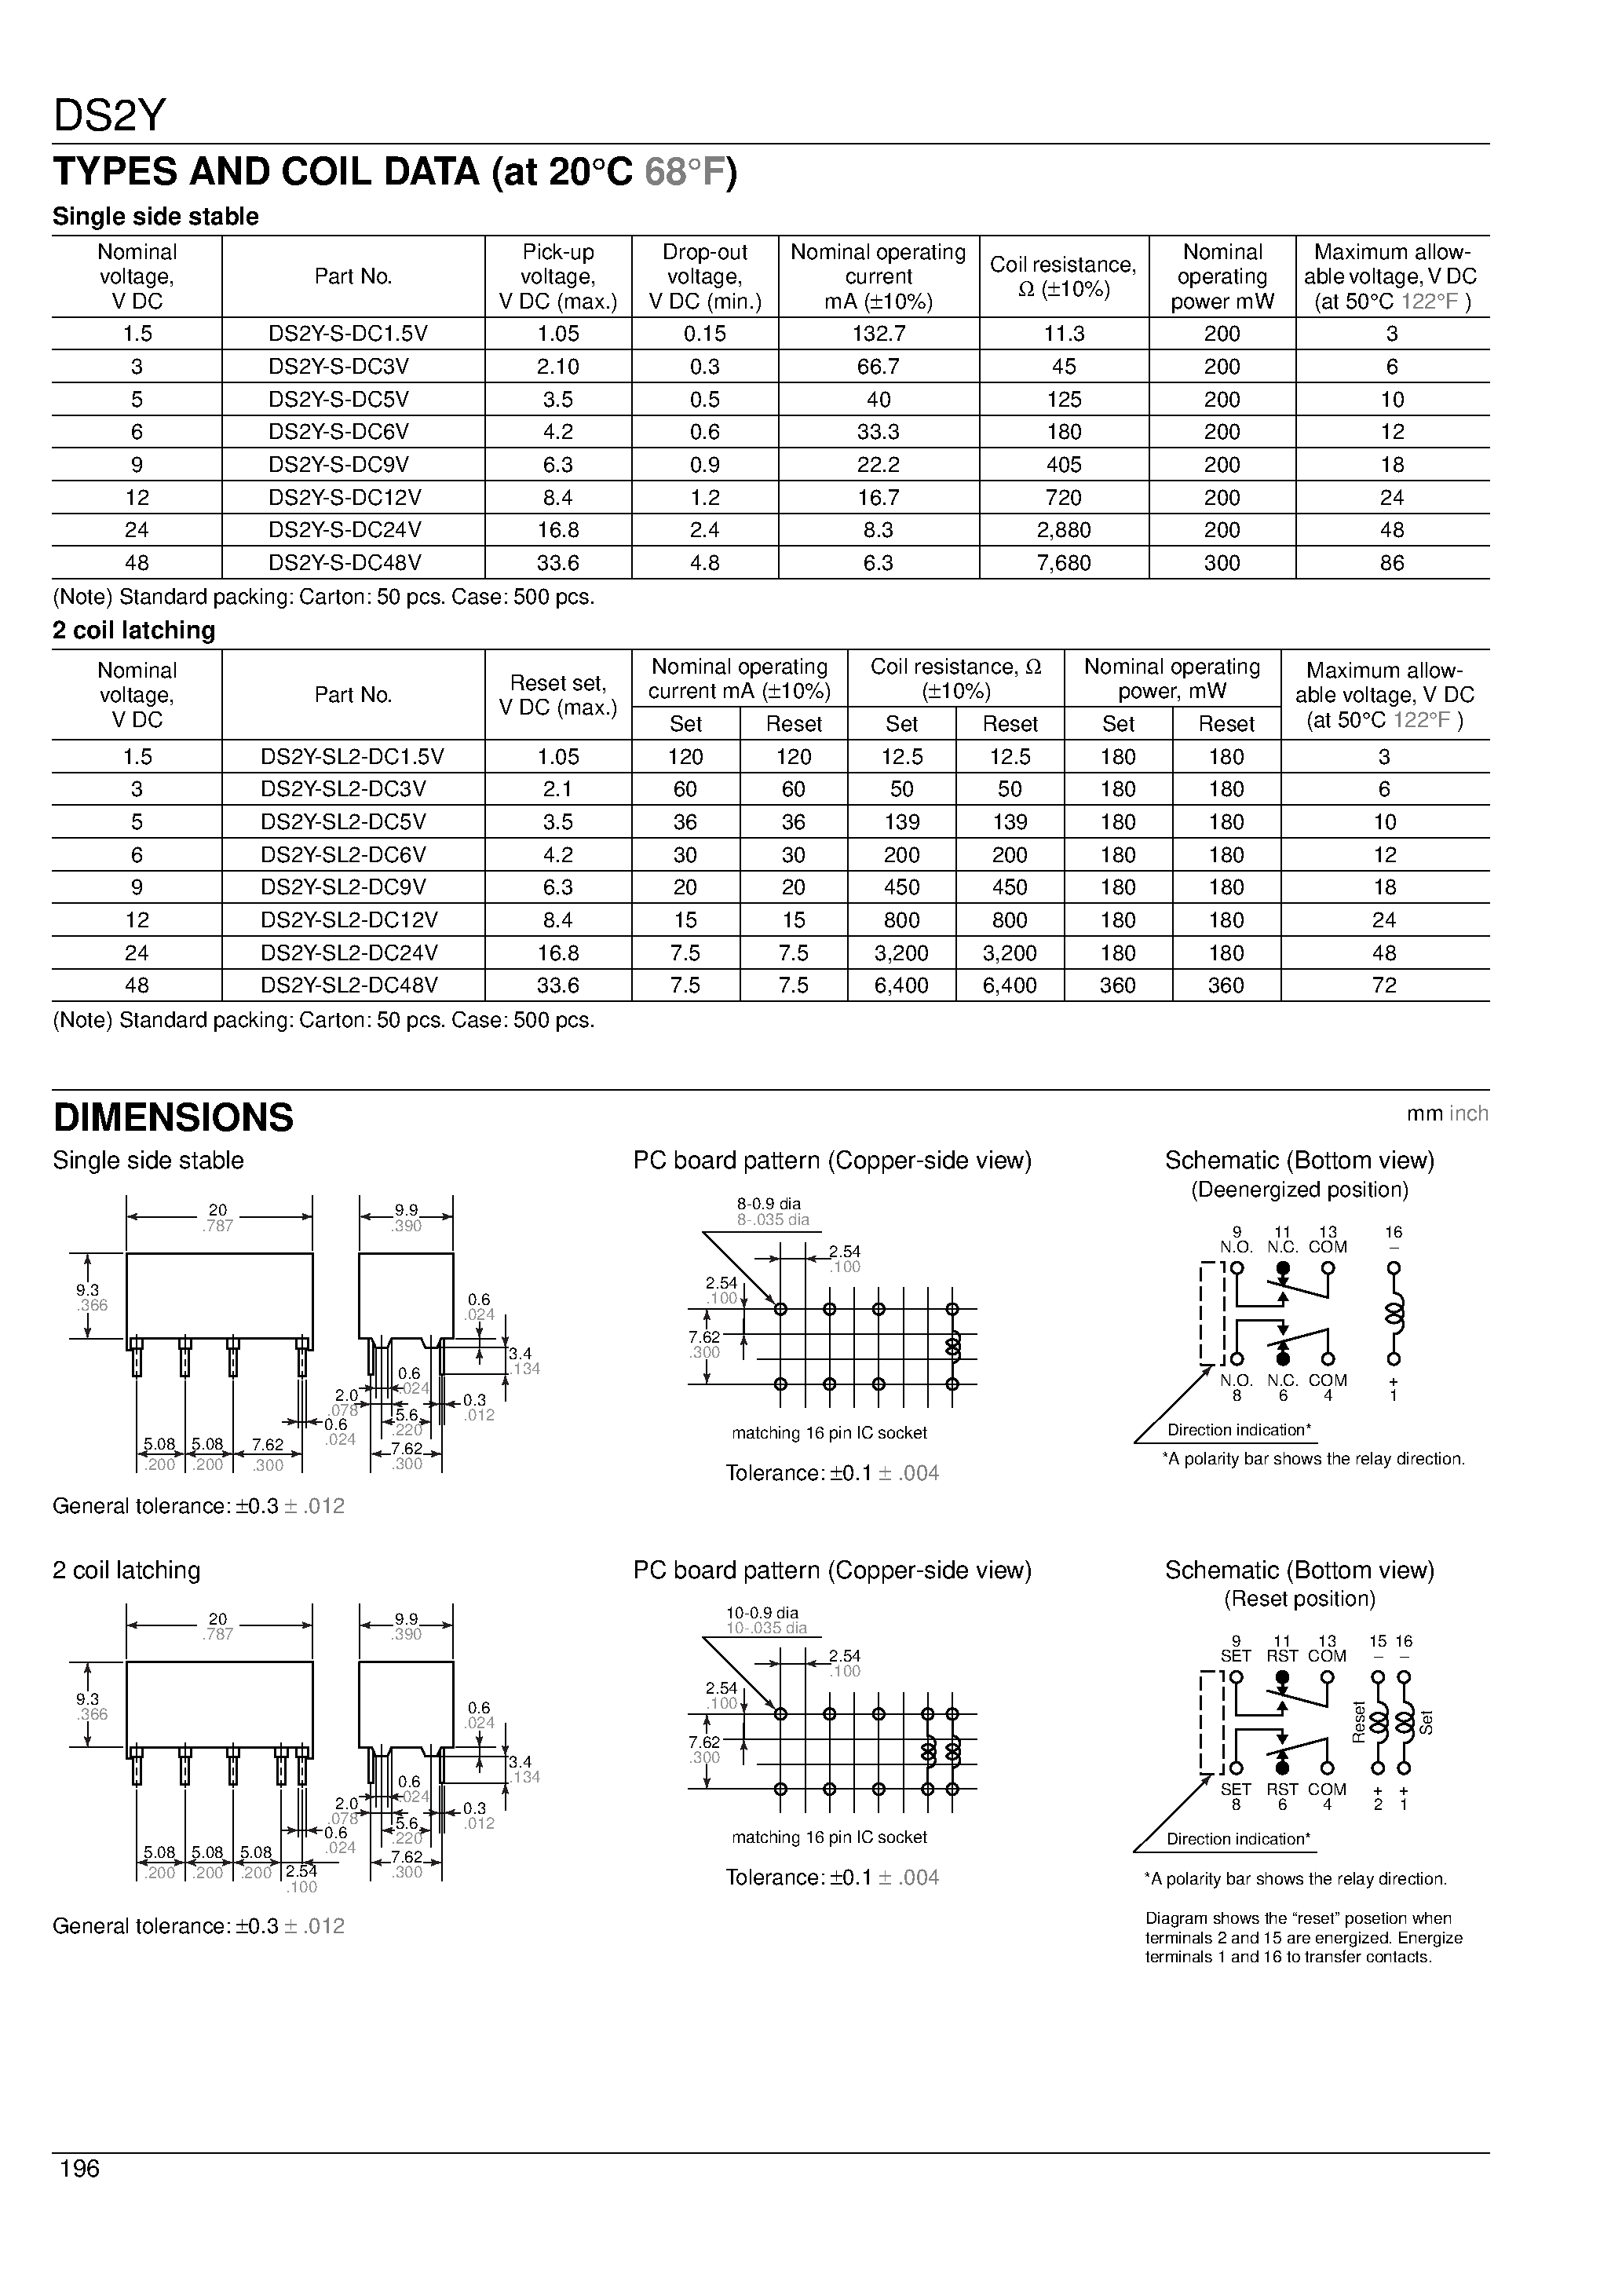 Datasheet DS2Y-S-DC24V - 2 Form C contact High sensitivity-200 mW nominal operating power page 2